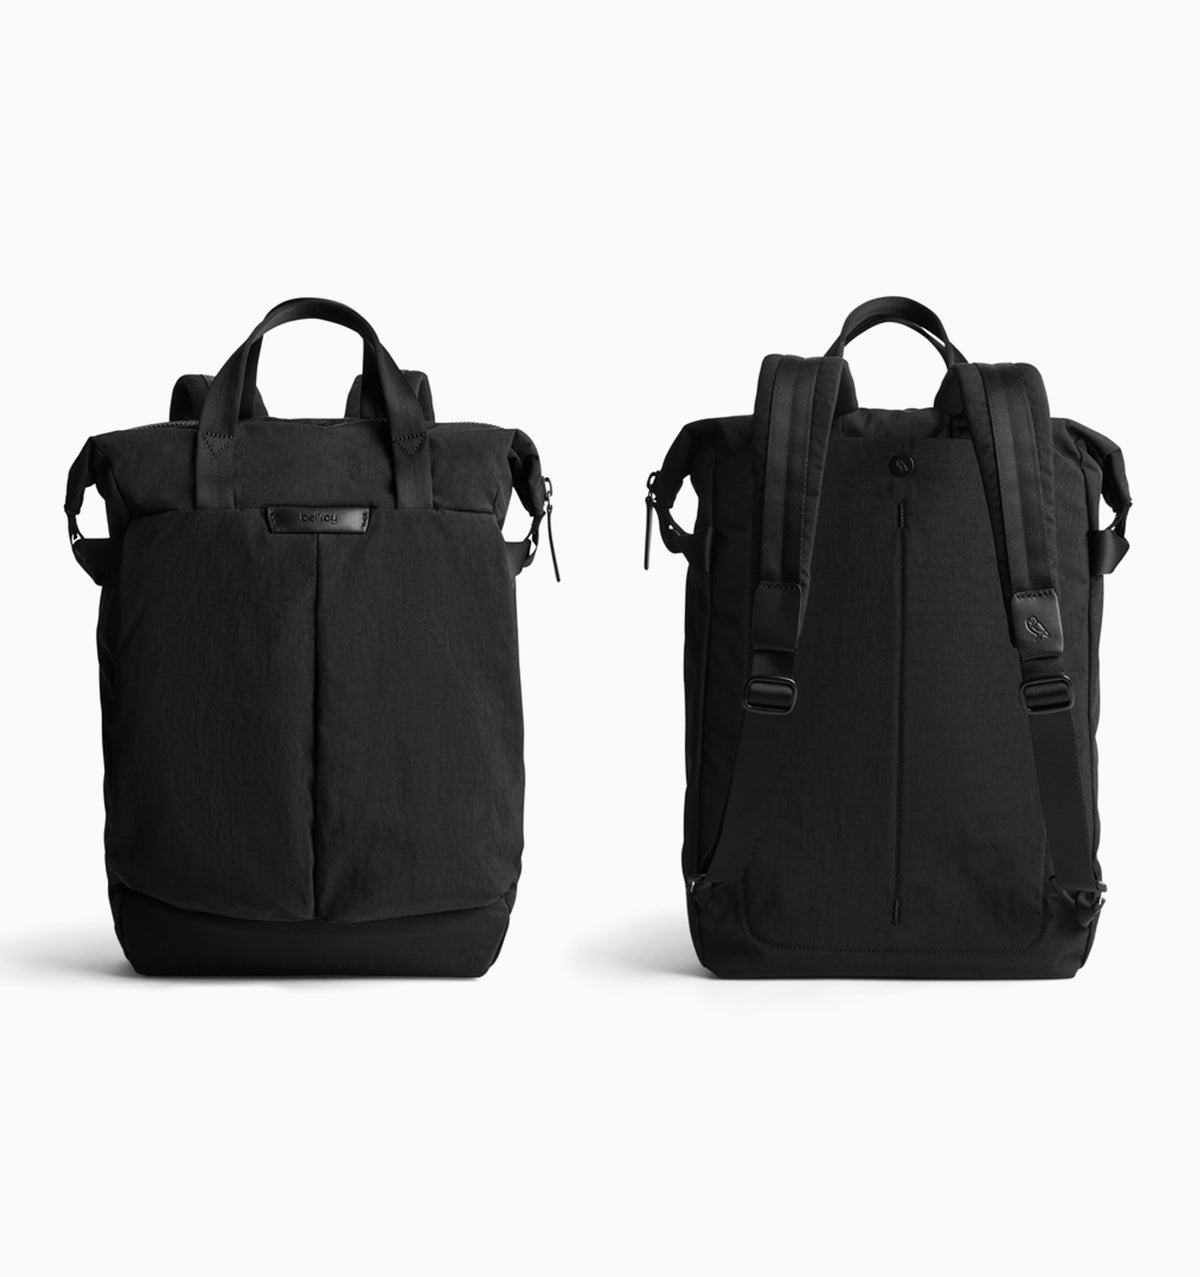 Bellroy 13" Tokyo Totepack Compact Laptop Backpack 14L